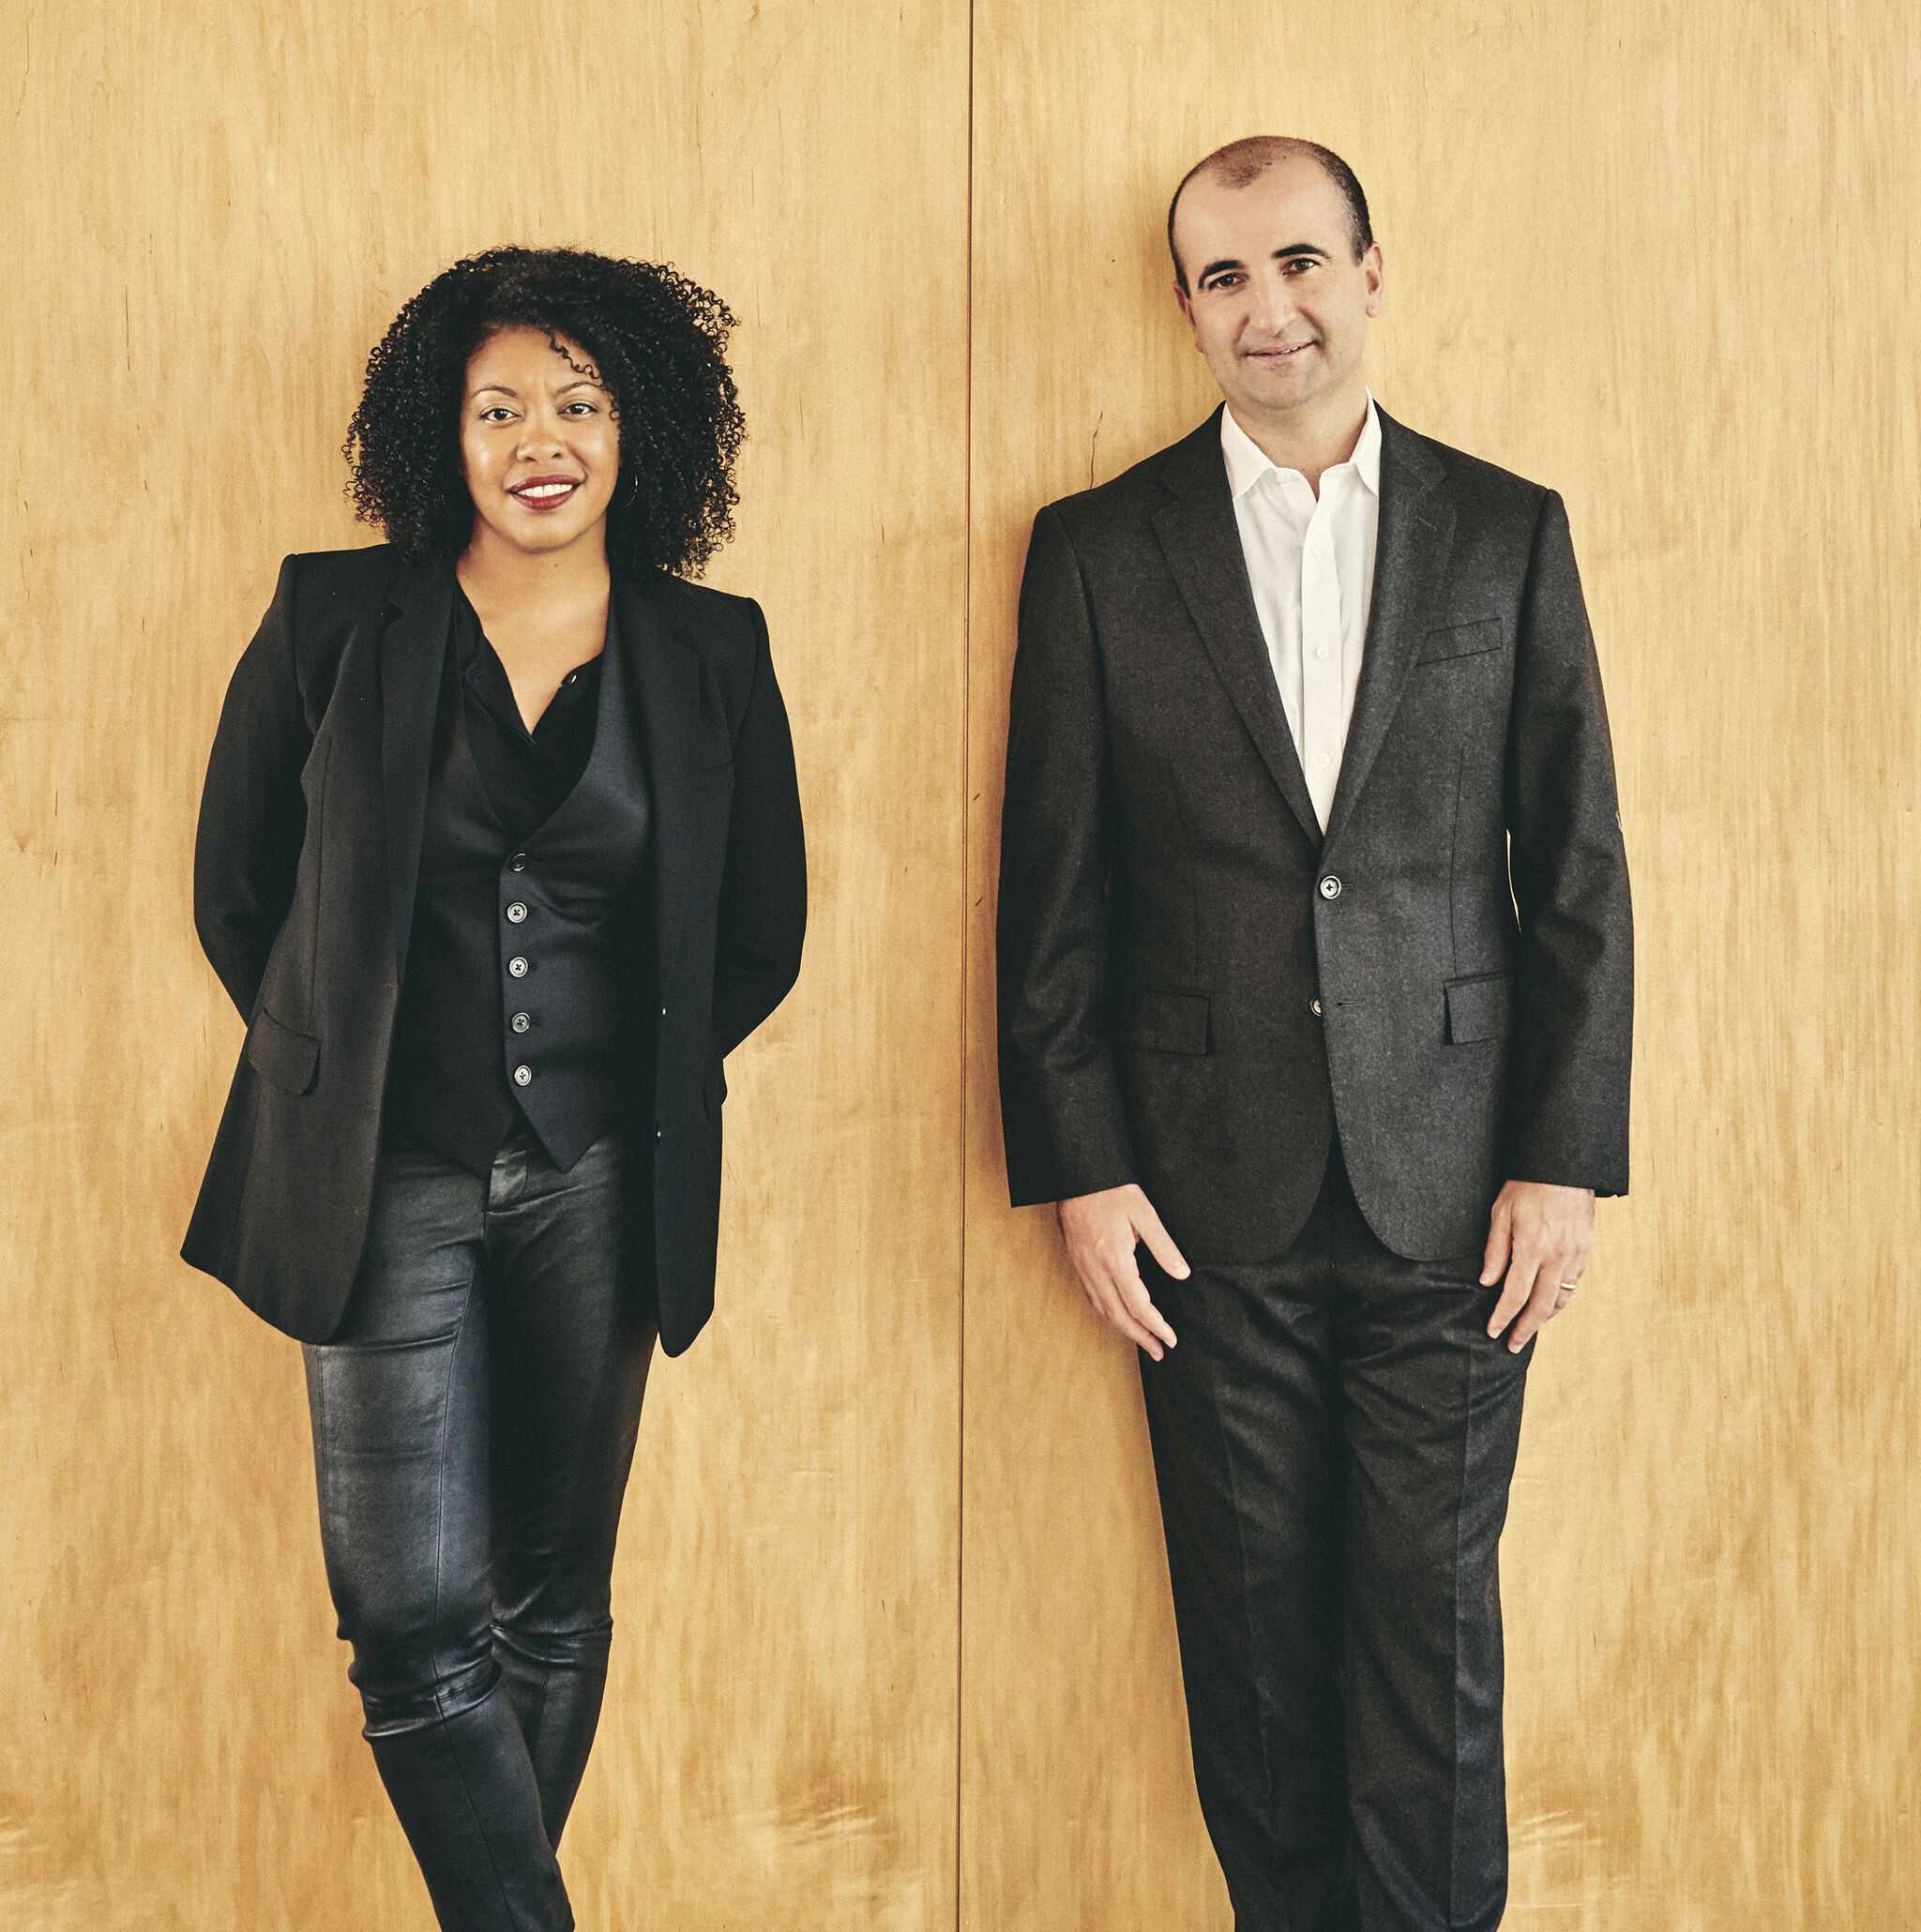 Curators Adrienne Edwards and David Breslin in all-black ensembles leaning against a wooden wall